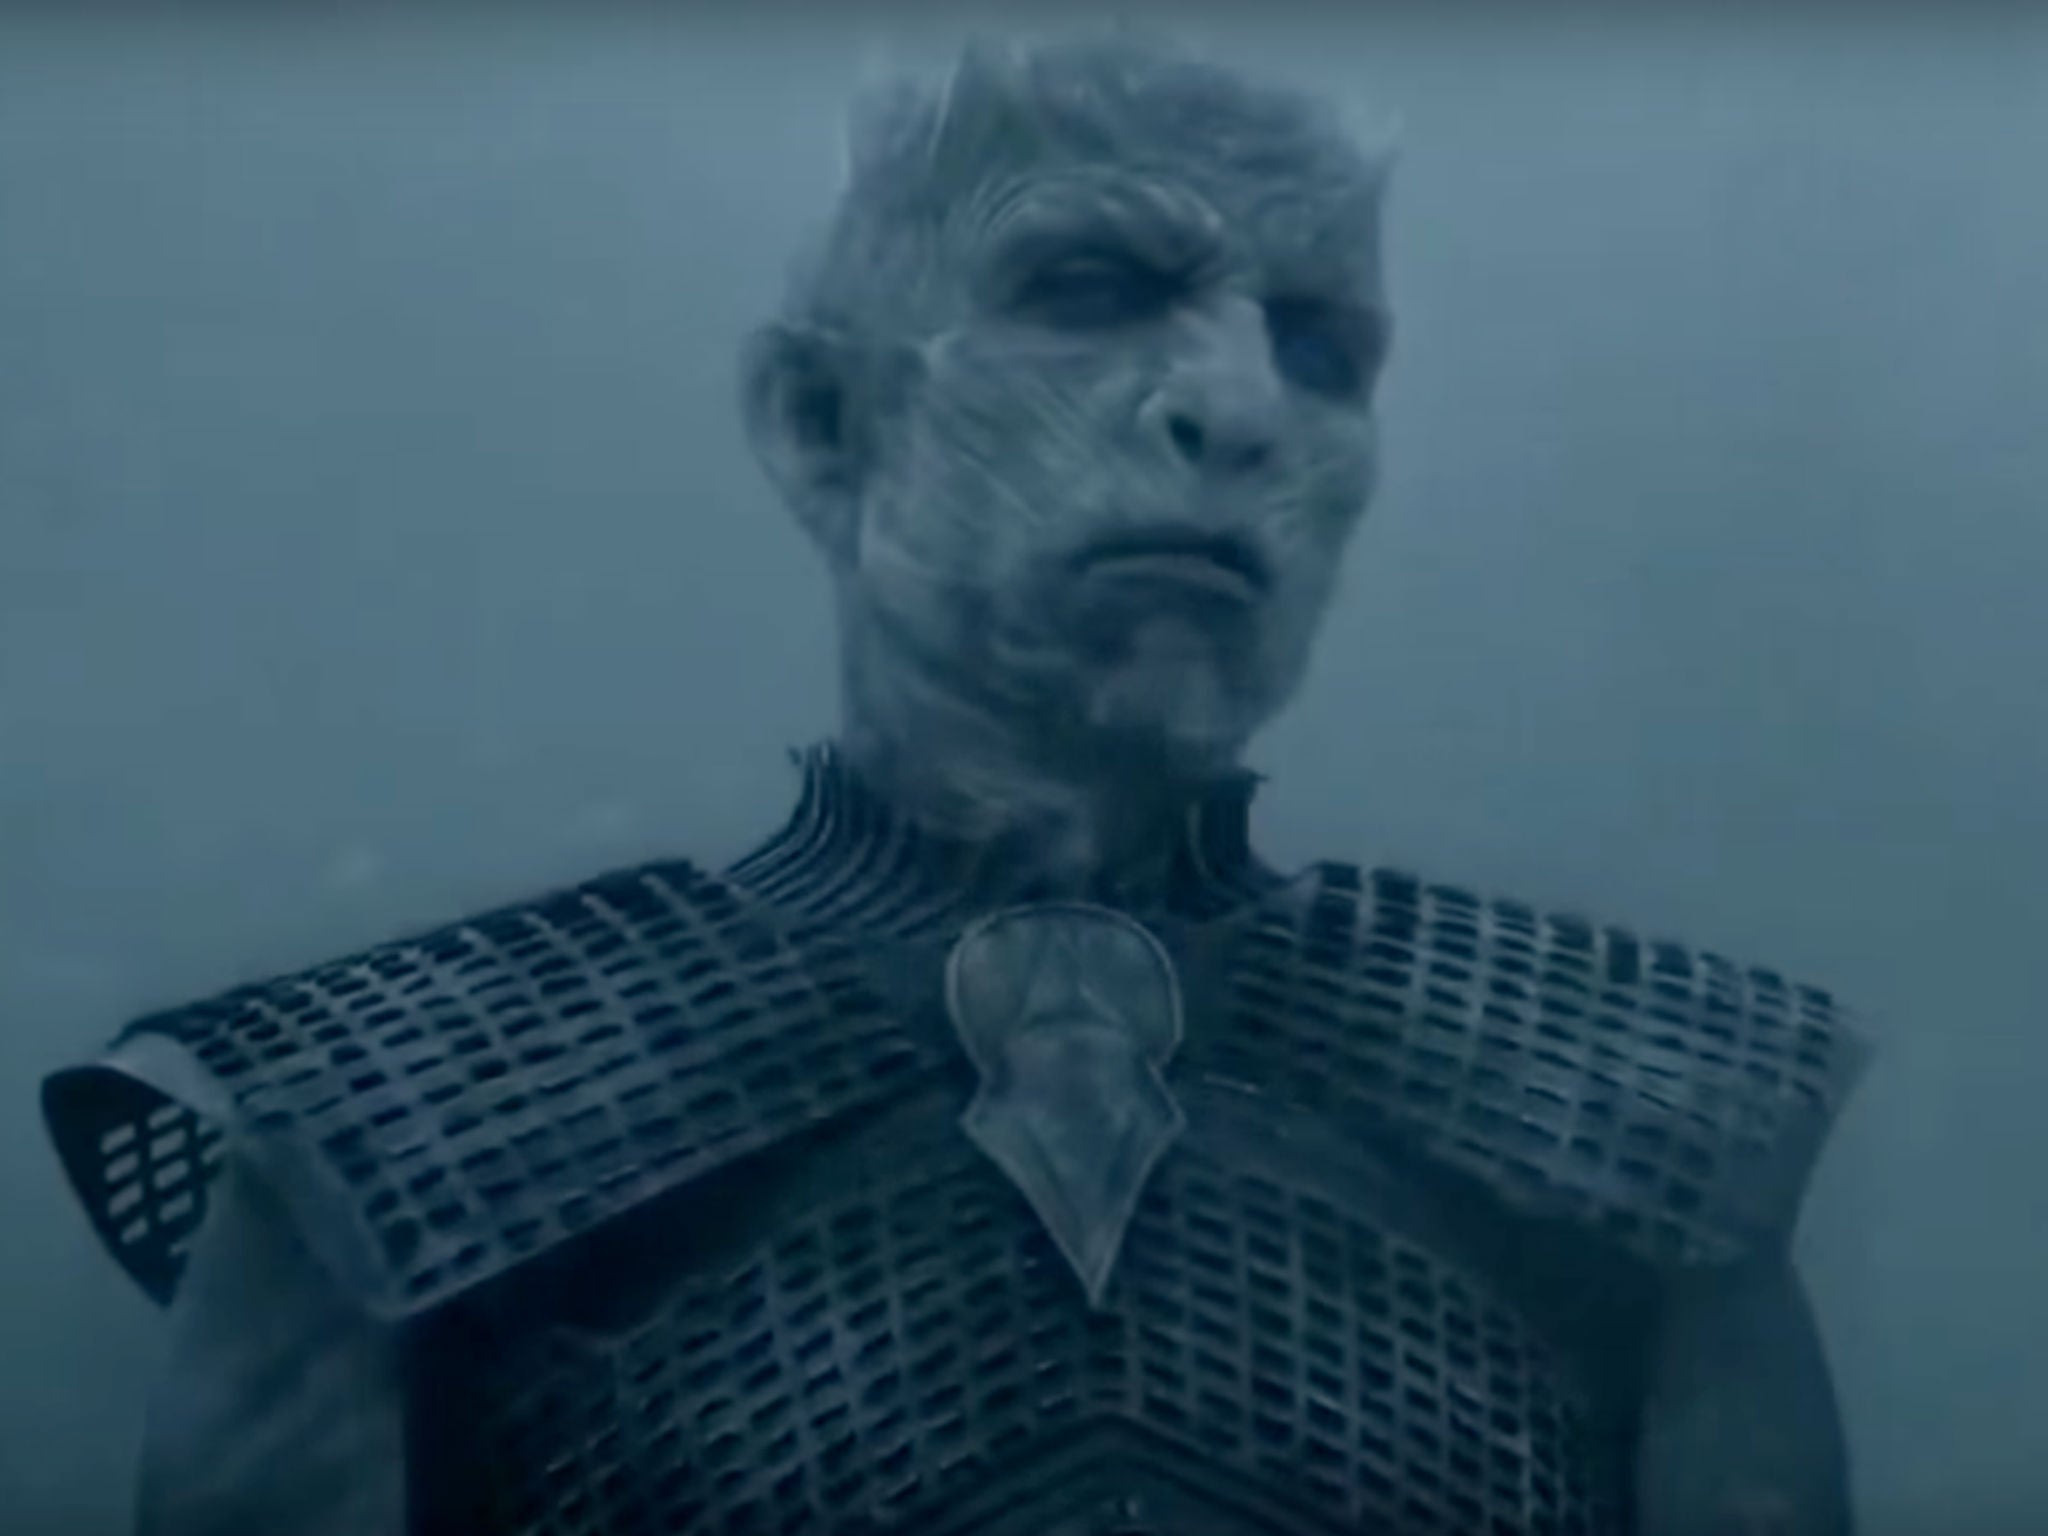 Fans think the White Walkers will break The Wall in The Winds of Winter